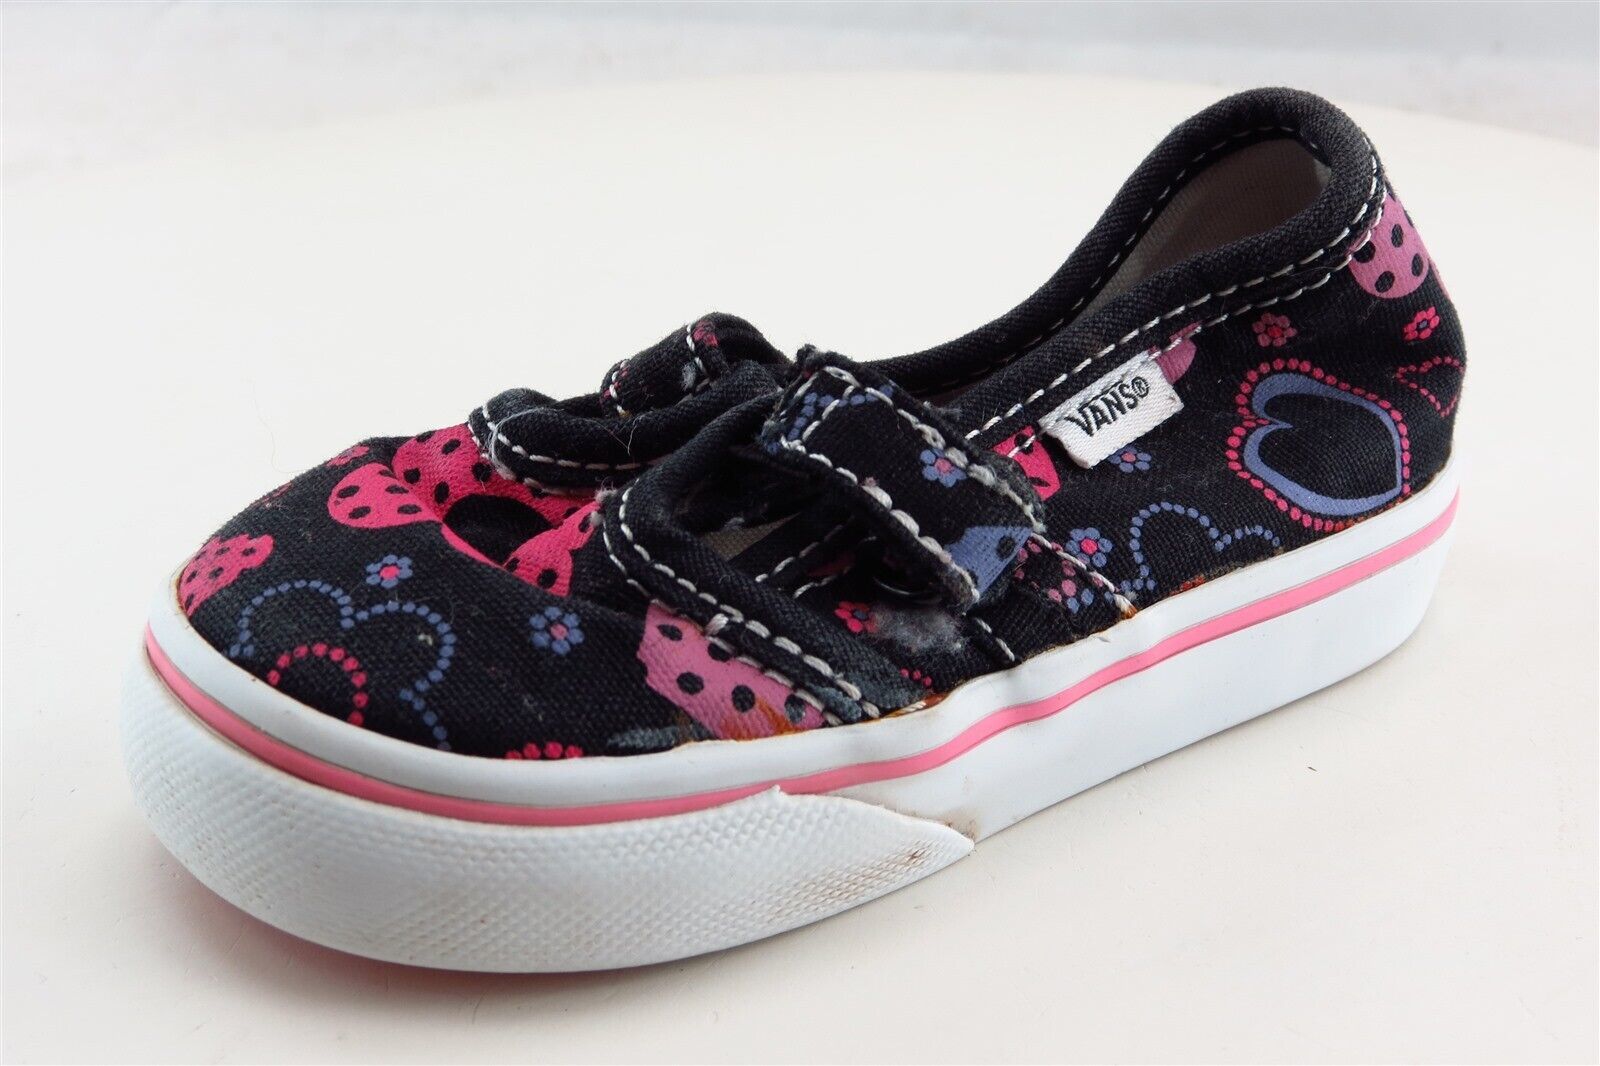 Primary image for VANS Black Fabric Casual Shoes Toddler Girls Sz 5